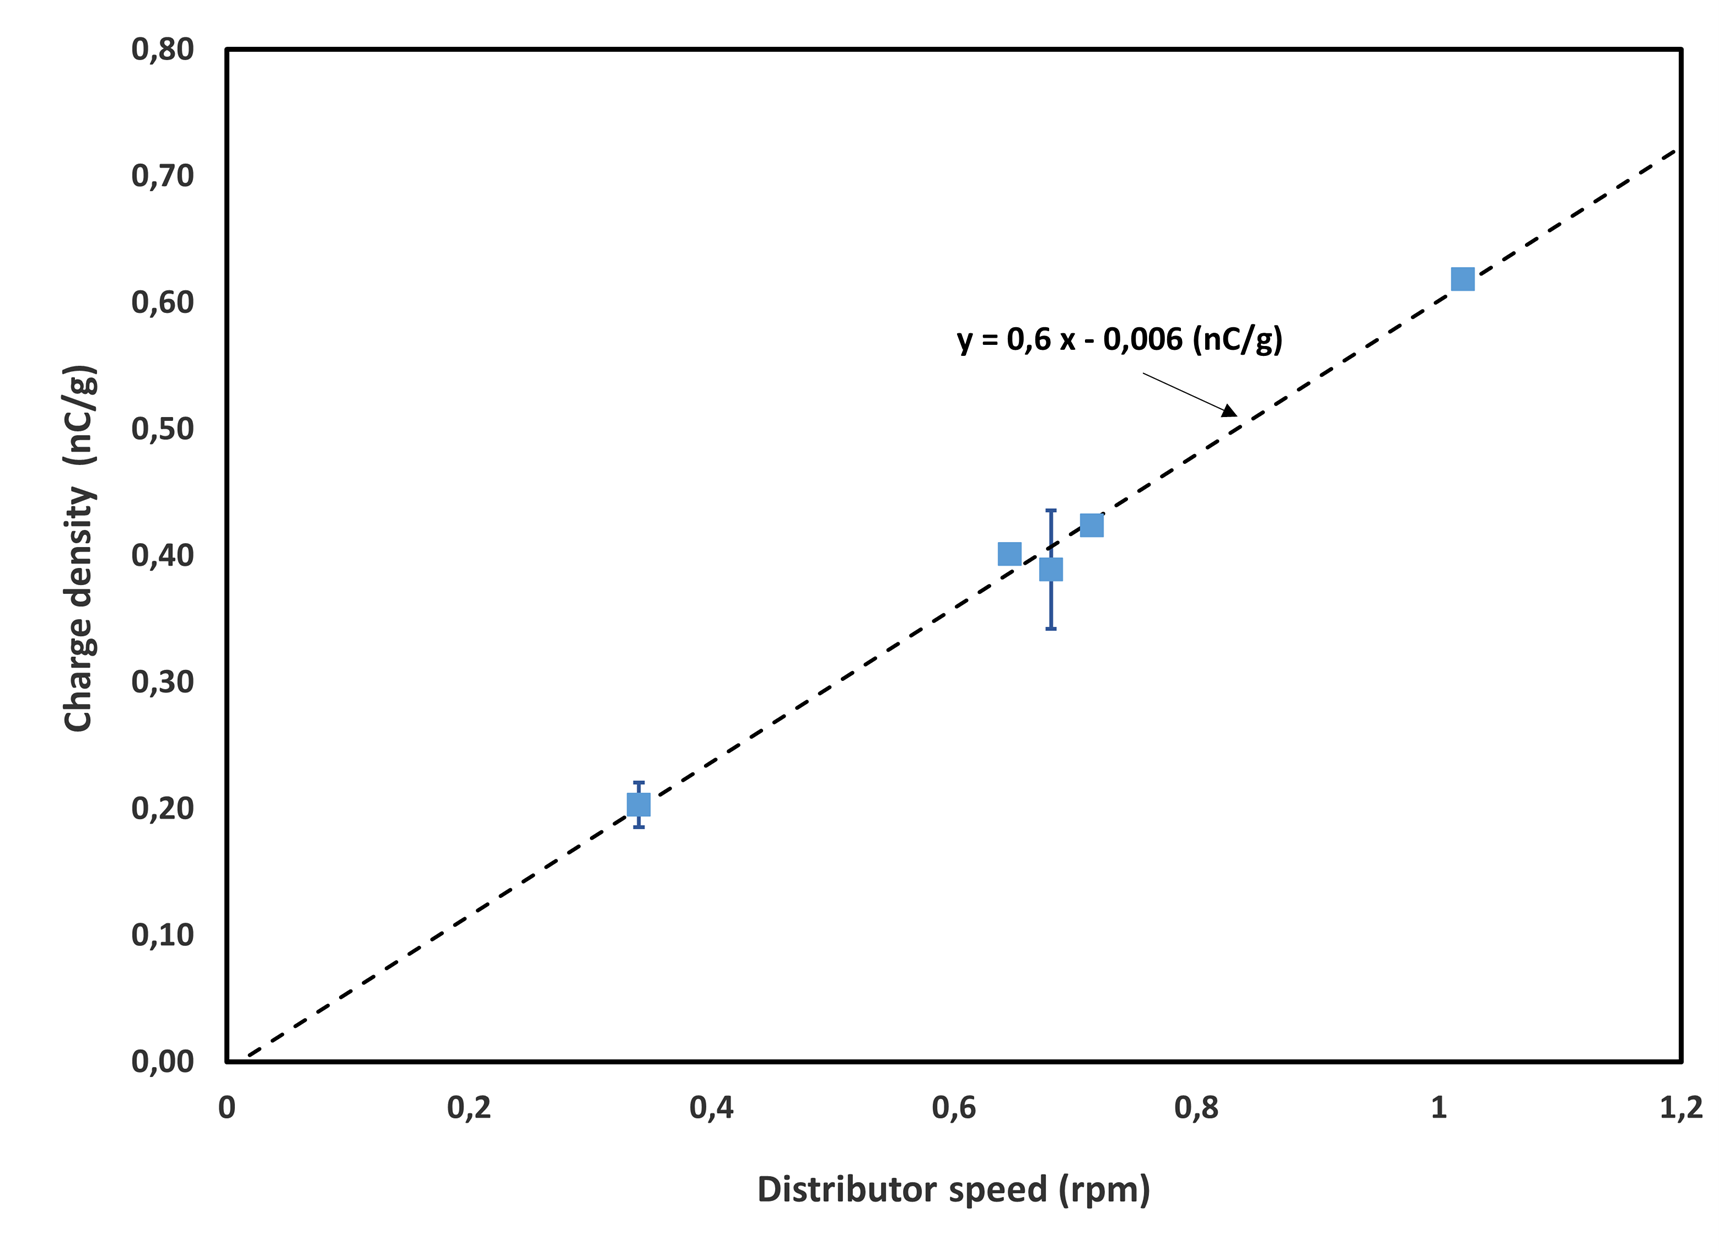 figure of the influence of the distributor speed on the powder charge density with dashed line